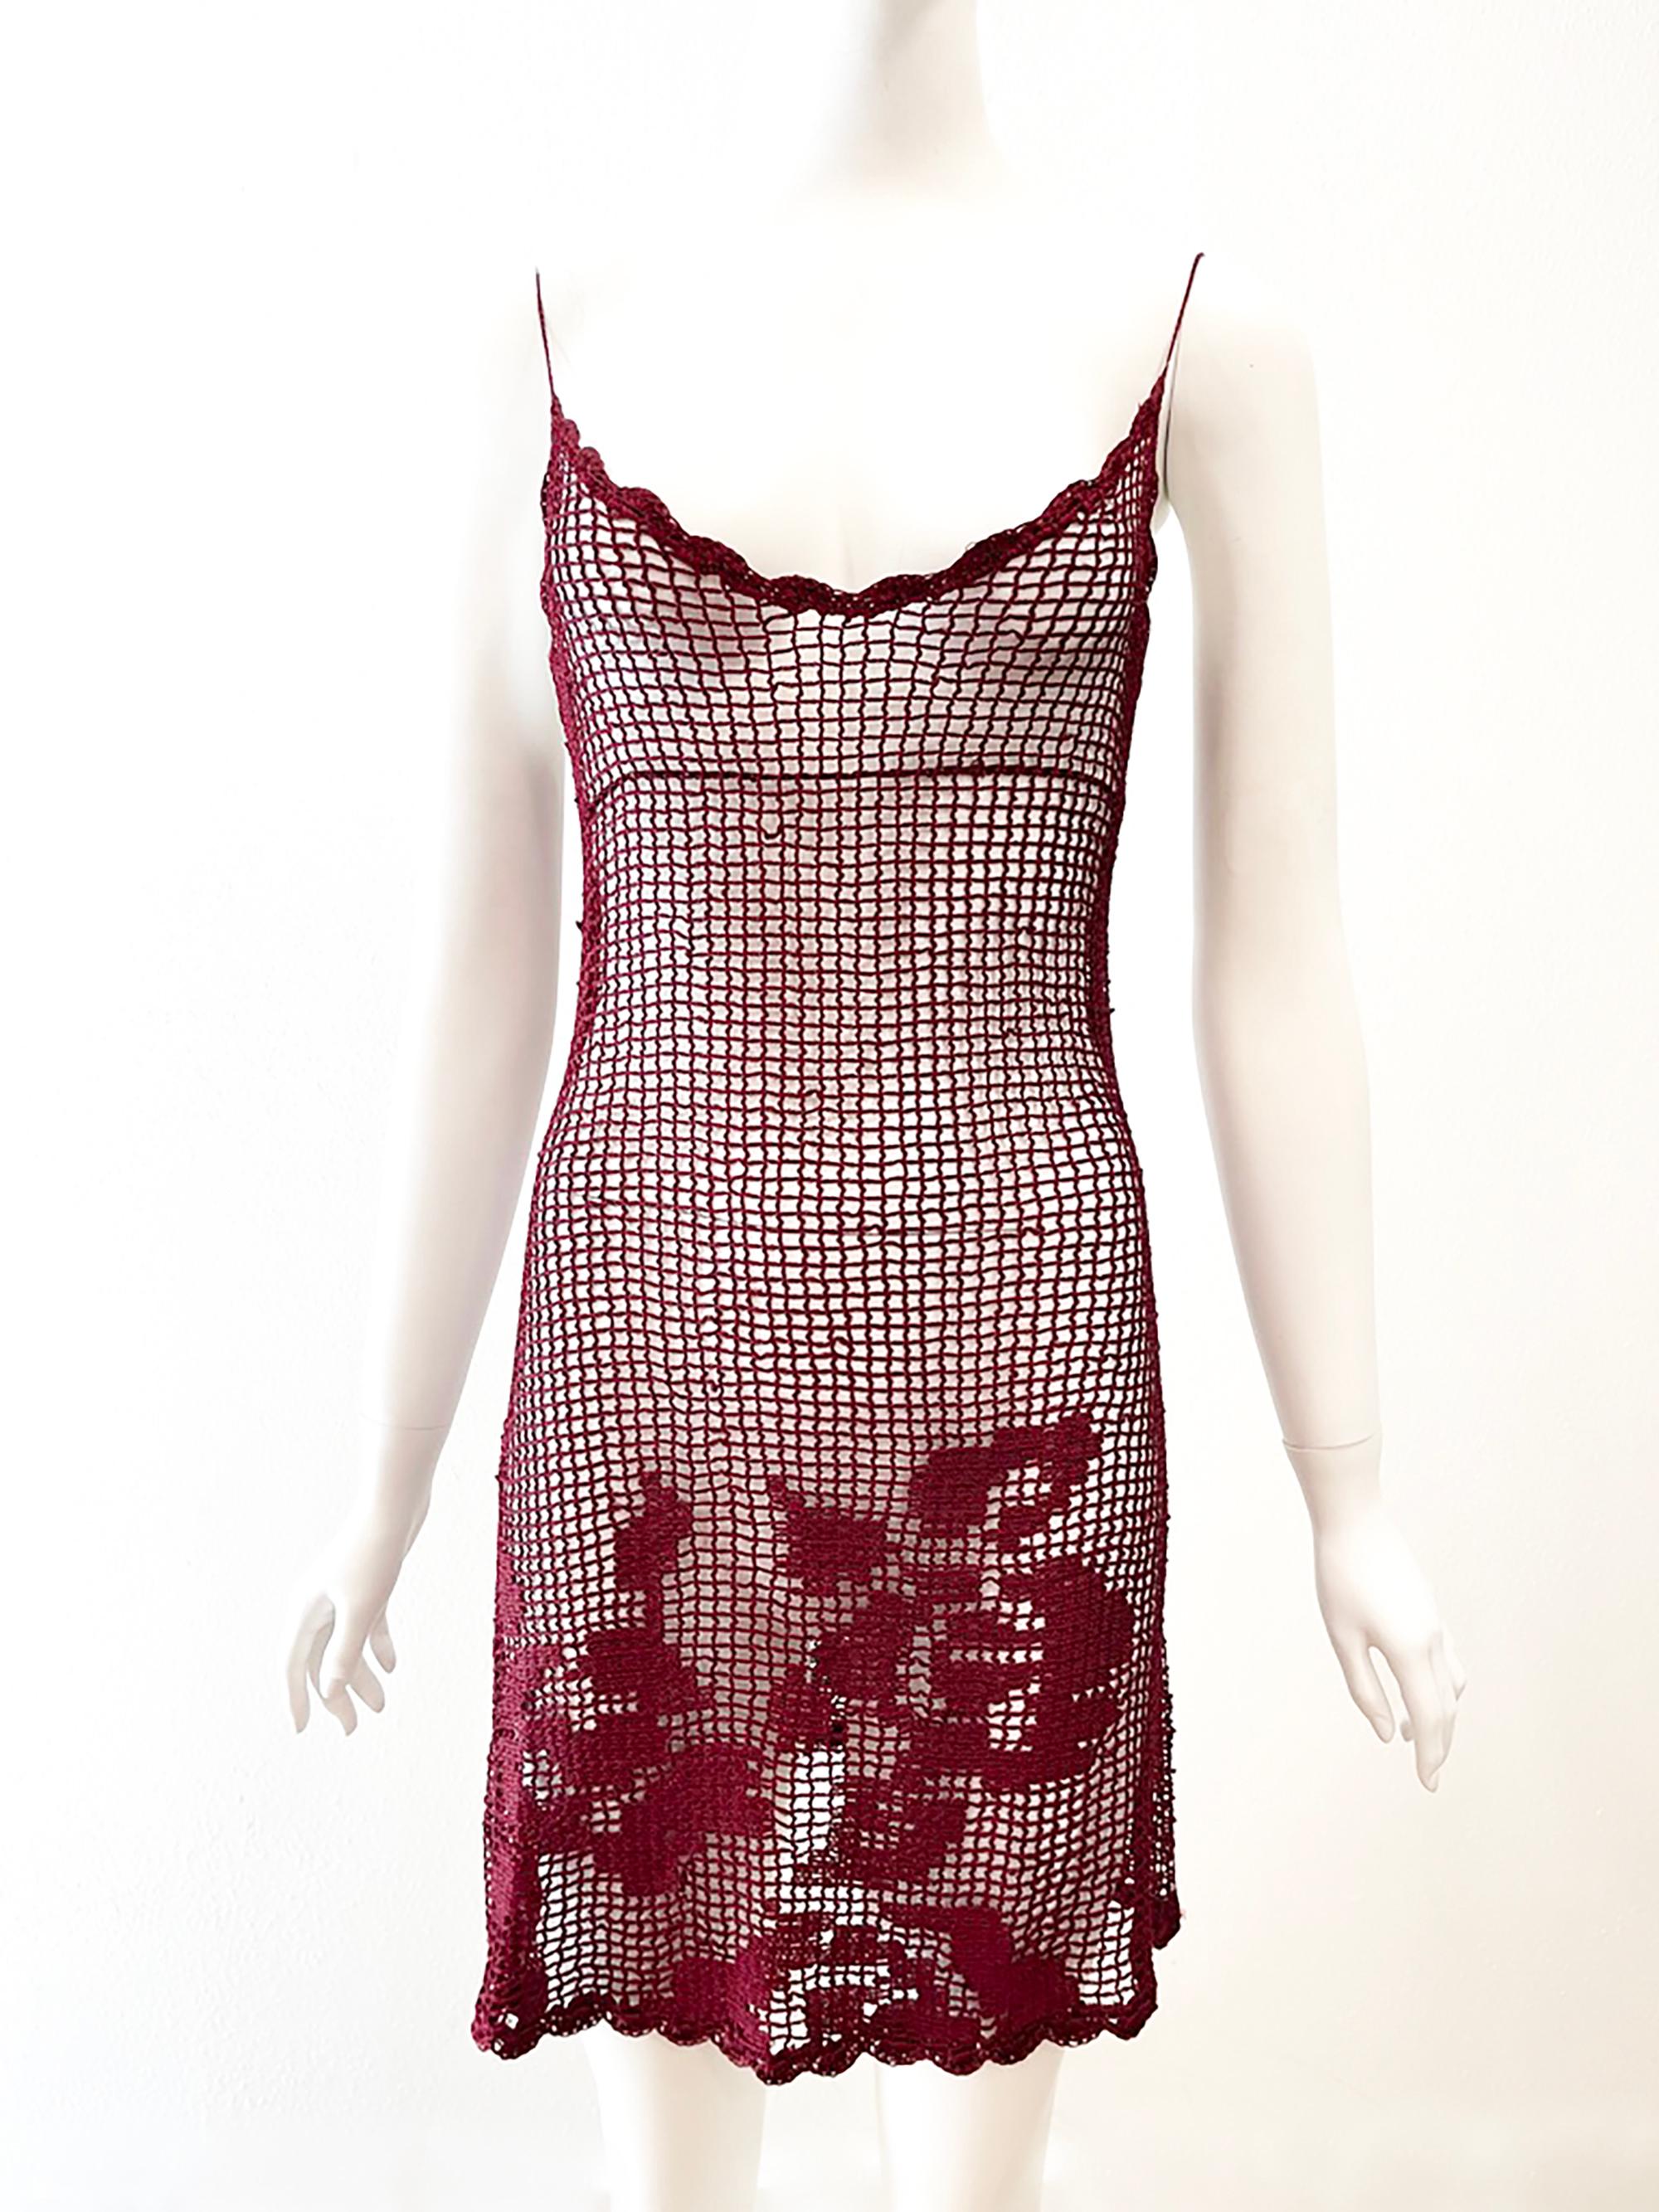 F/W 1997 DOLCE & GABBANA Burgundy Knit Mini Dress

Condition: Very Good
Made in Italy
Bust: 32